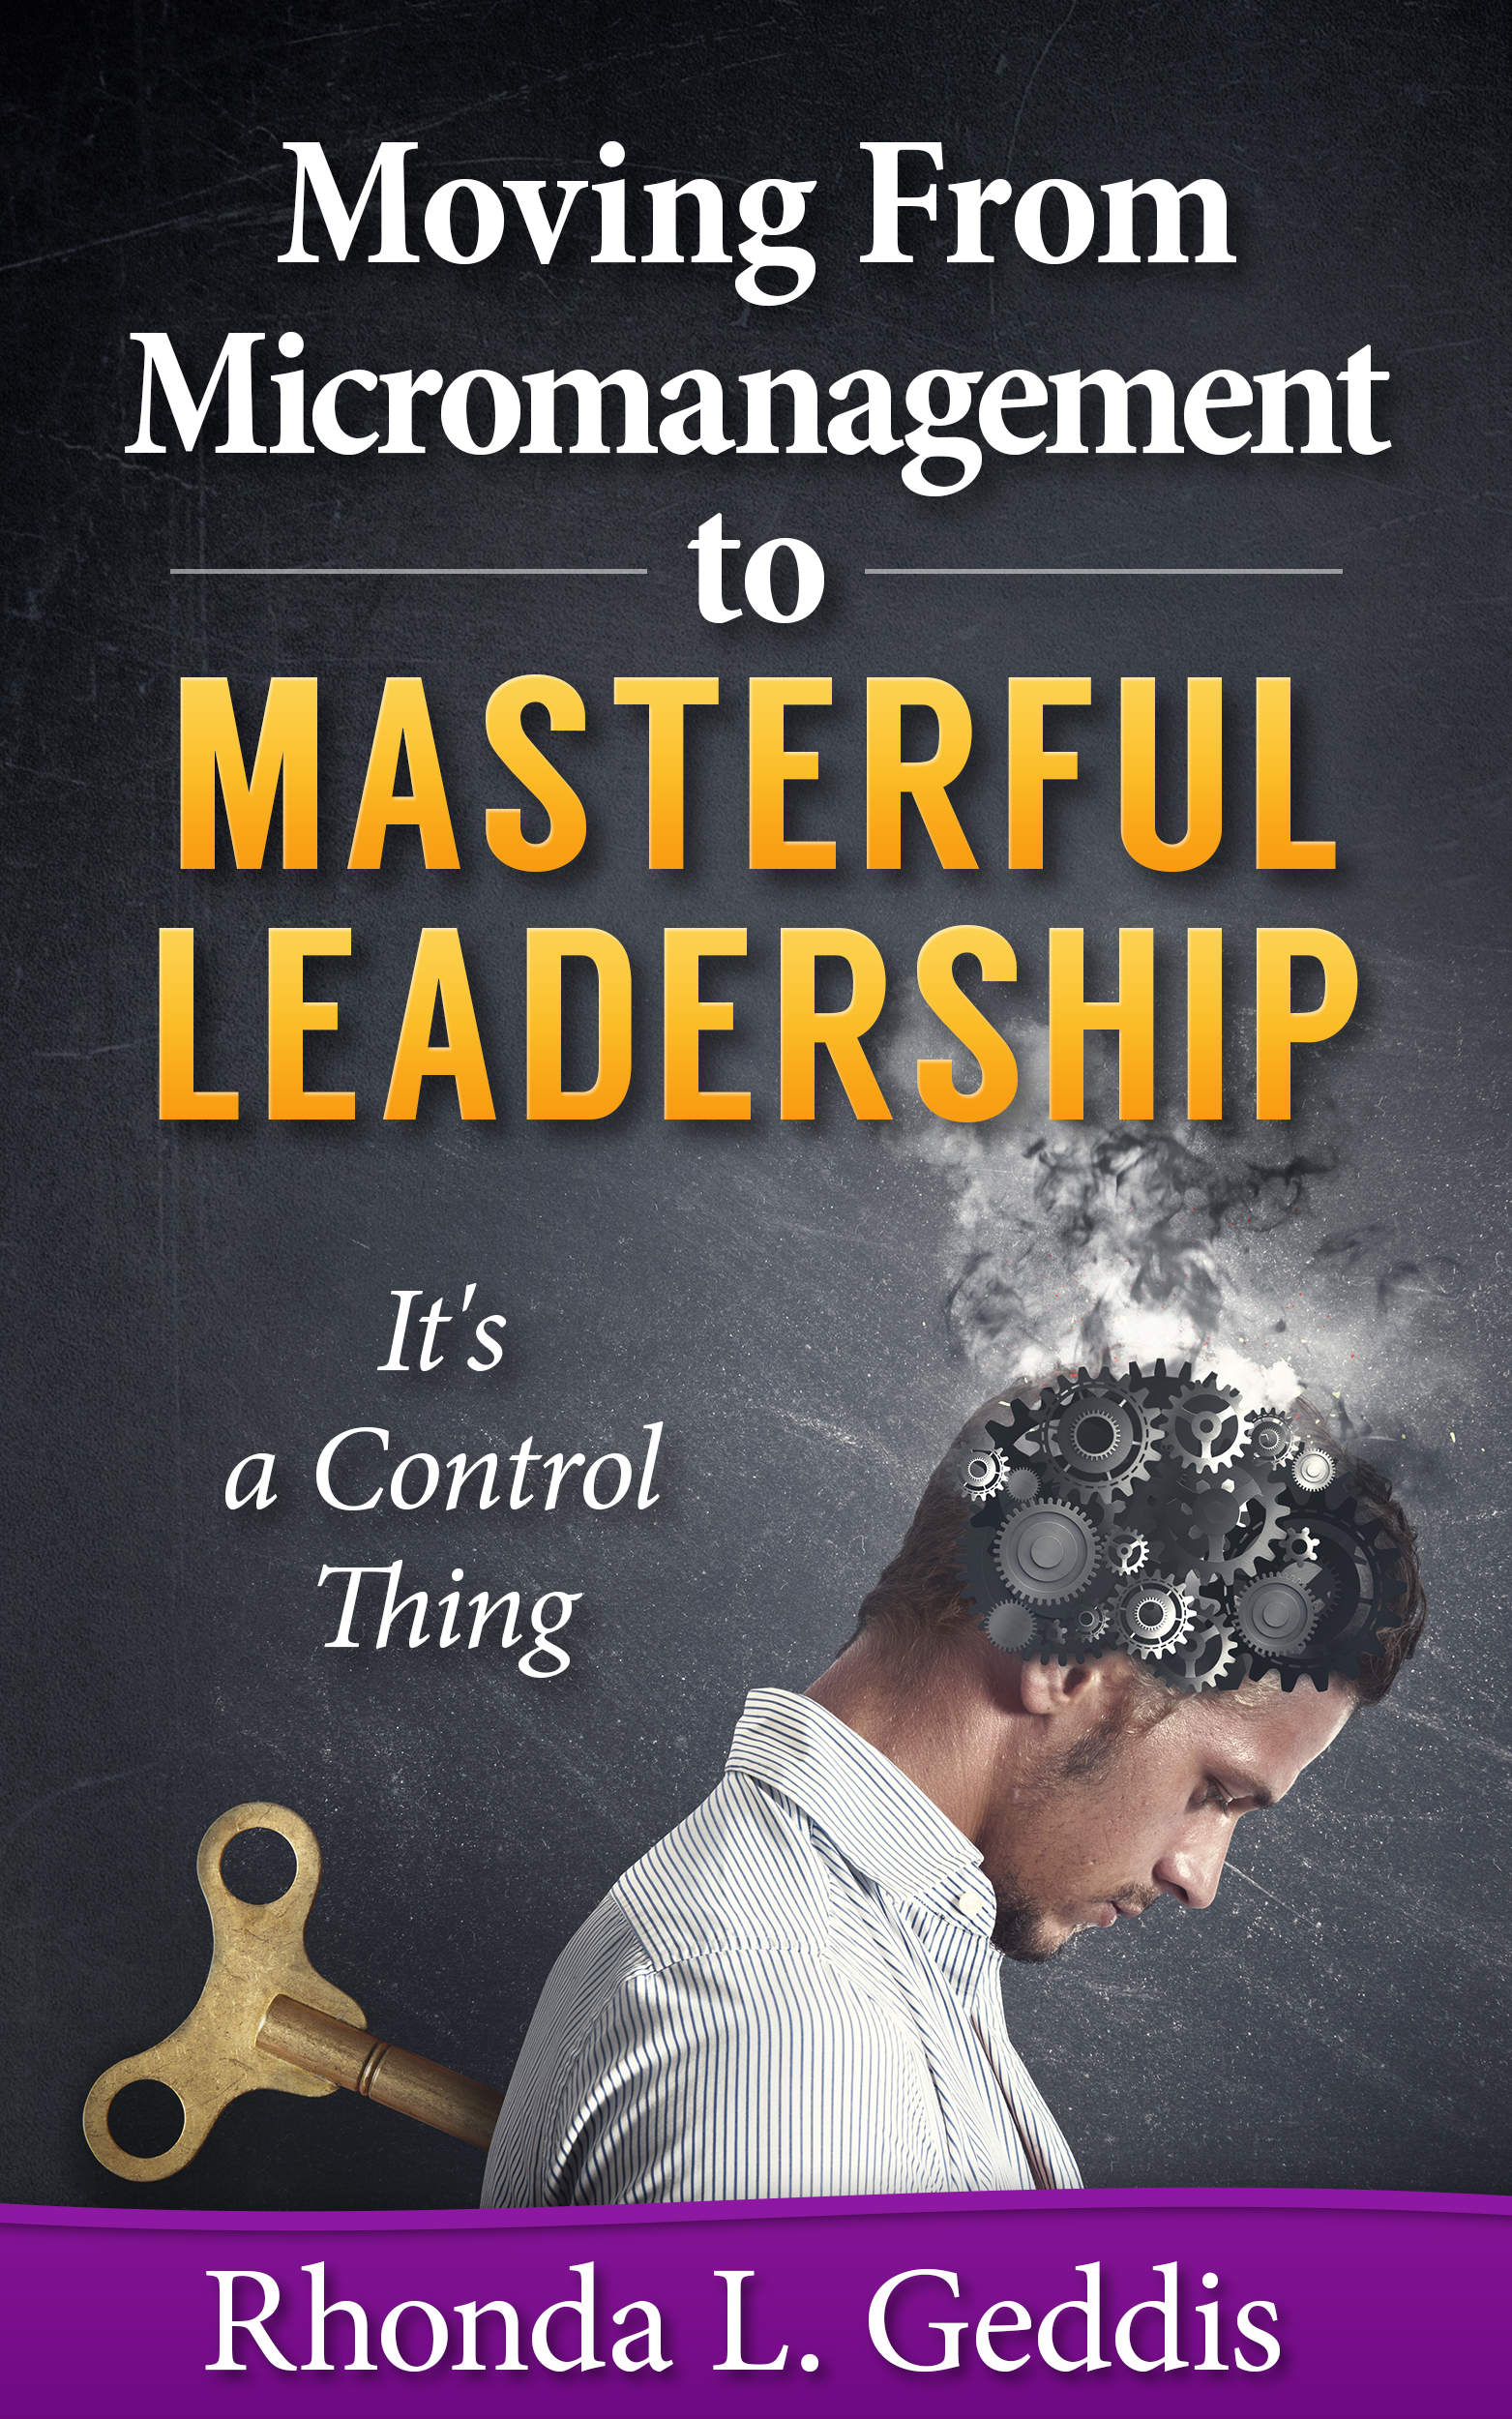 Moving From Micromanagement to Masterful Leadership: It's a Control Thing